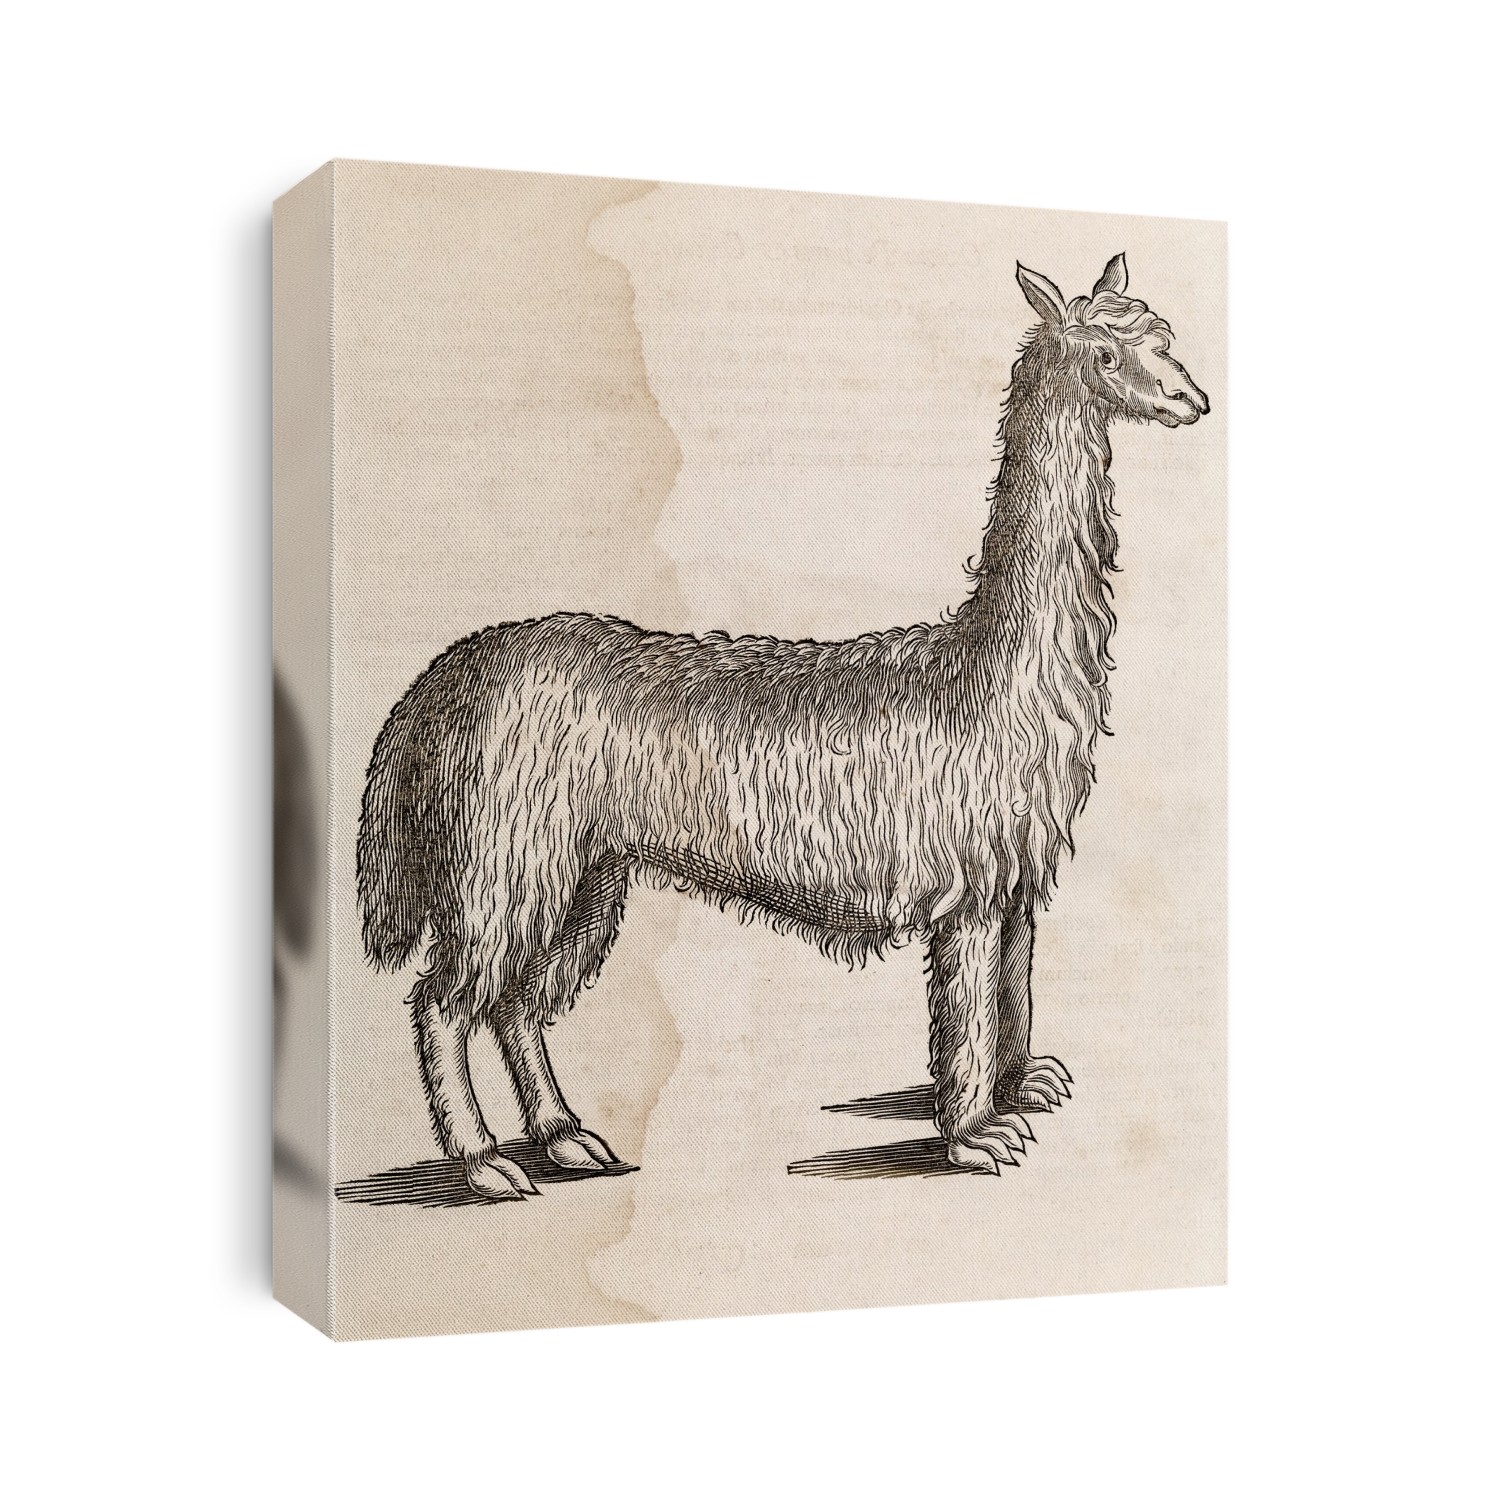 South American camelid, 17th-century artwork. There are four main species of camelids in South America. Llamas and alpacas are domesticated, while guanacos and vicunas roam wild. Alpacas, smaller than llamas, are bred for their fur, while llamas are used as beasts of burden. Artwork from 'De medicina Brasiliensi libri quatuor' (Four books of Brazilian medicine, 1648) by Dutch physician and naturalist Willem Piso (1611-1678).